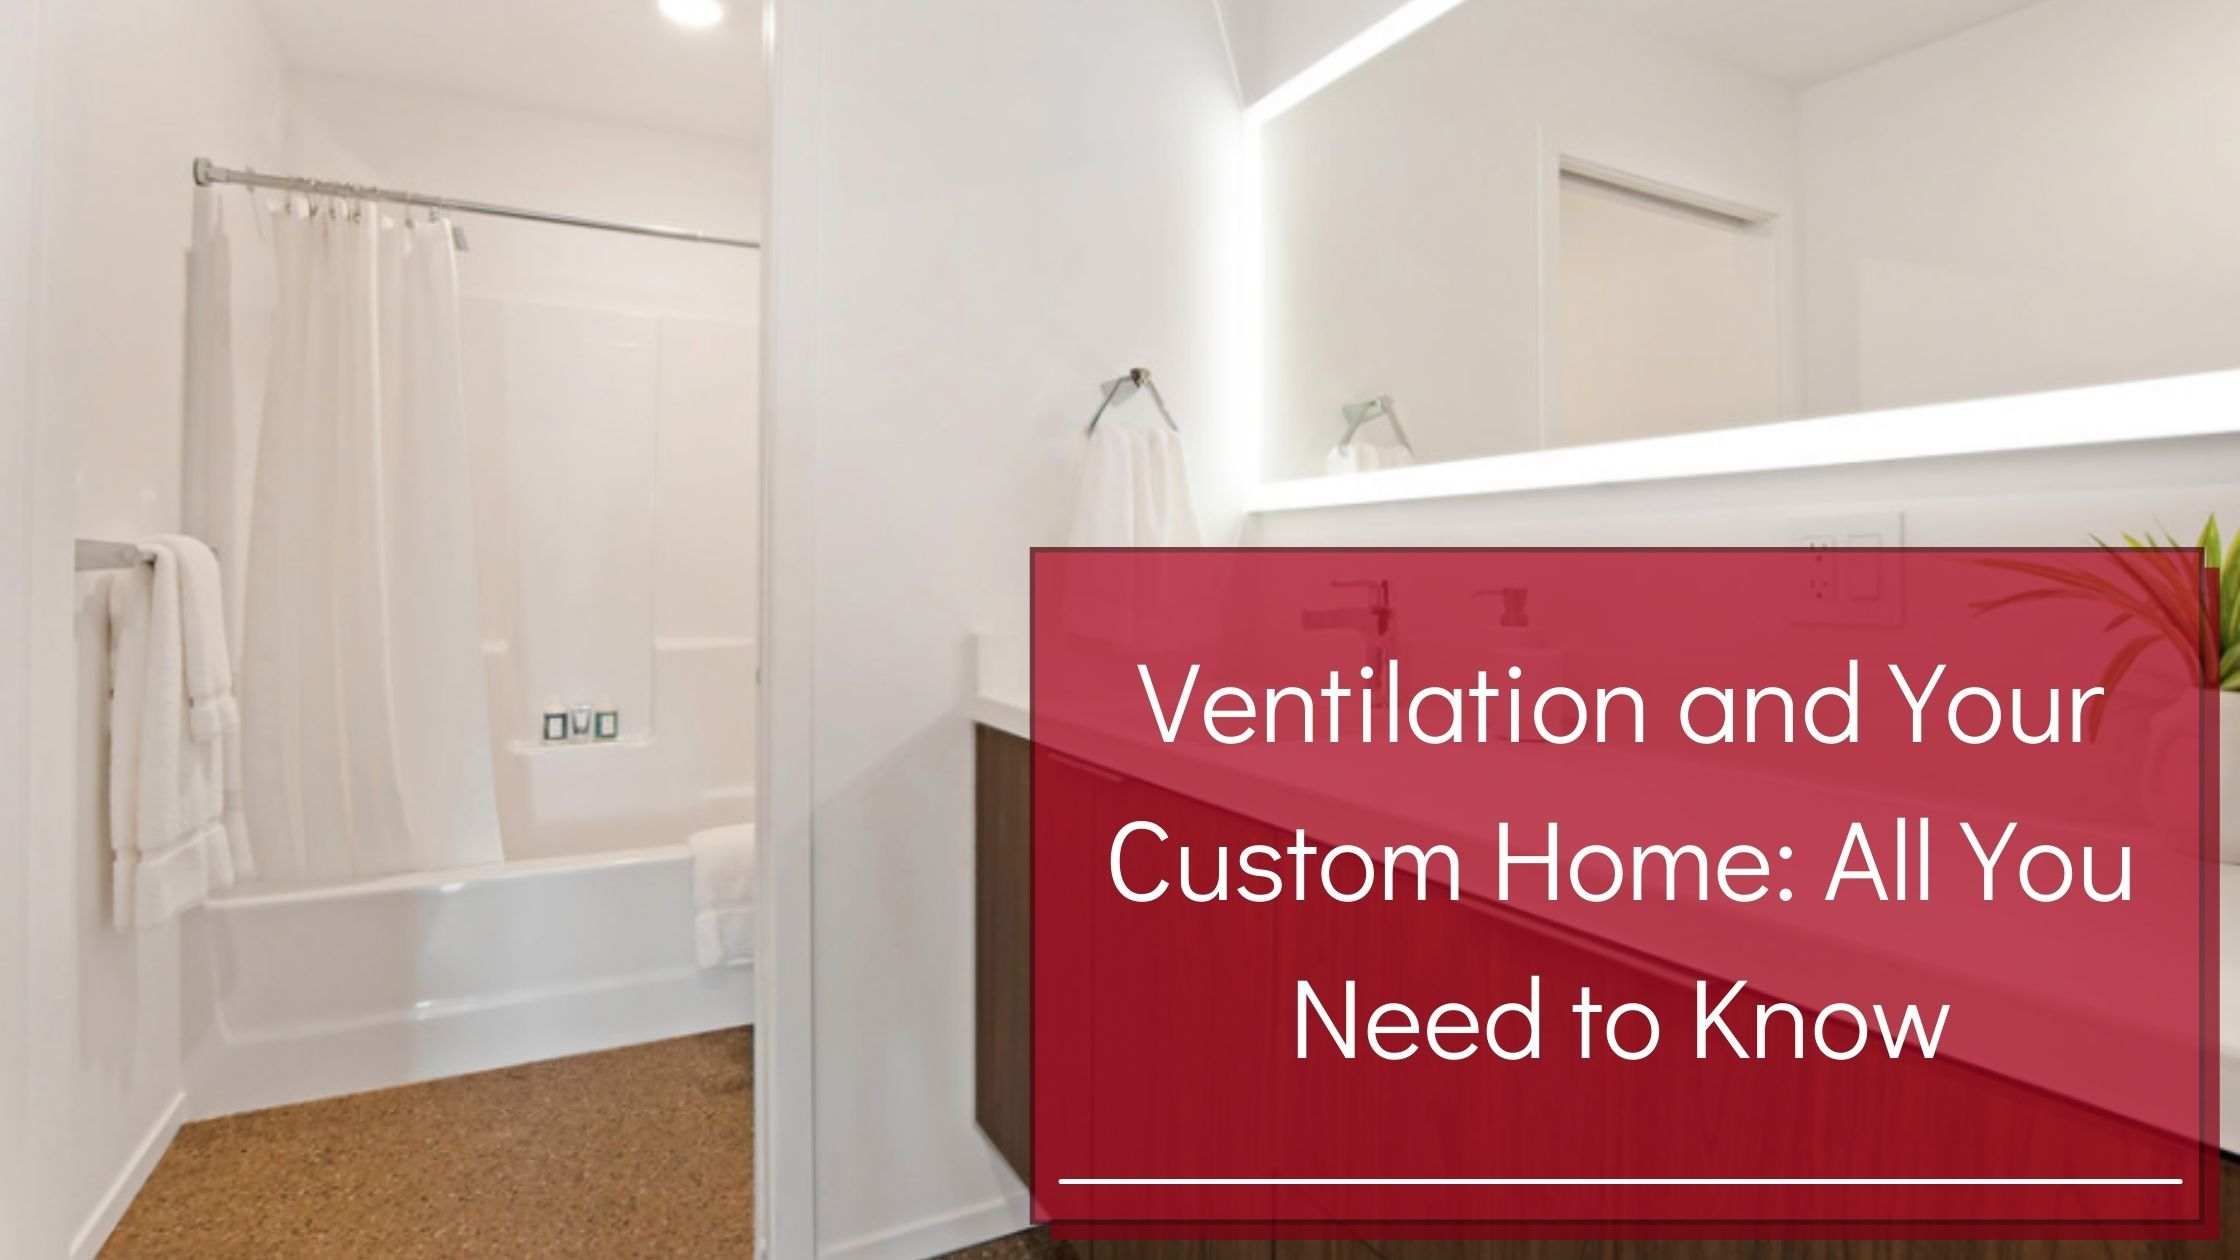 Ventilation and Your Custom Home: All You Need to Know